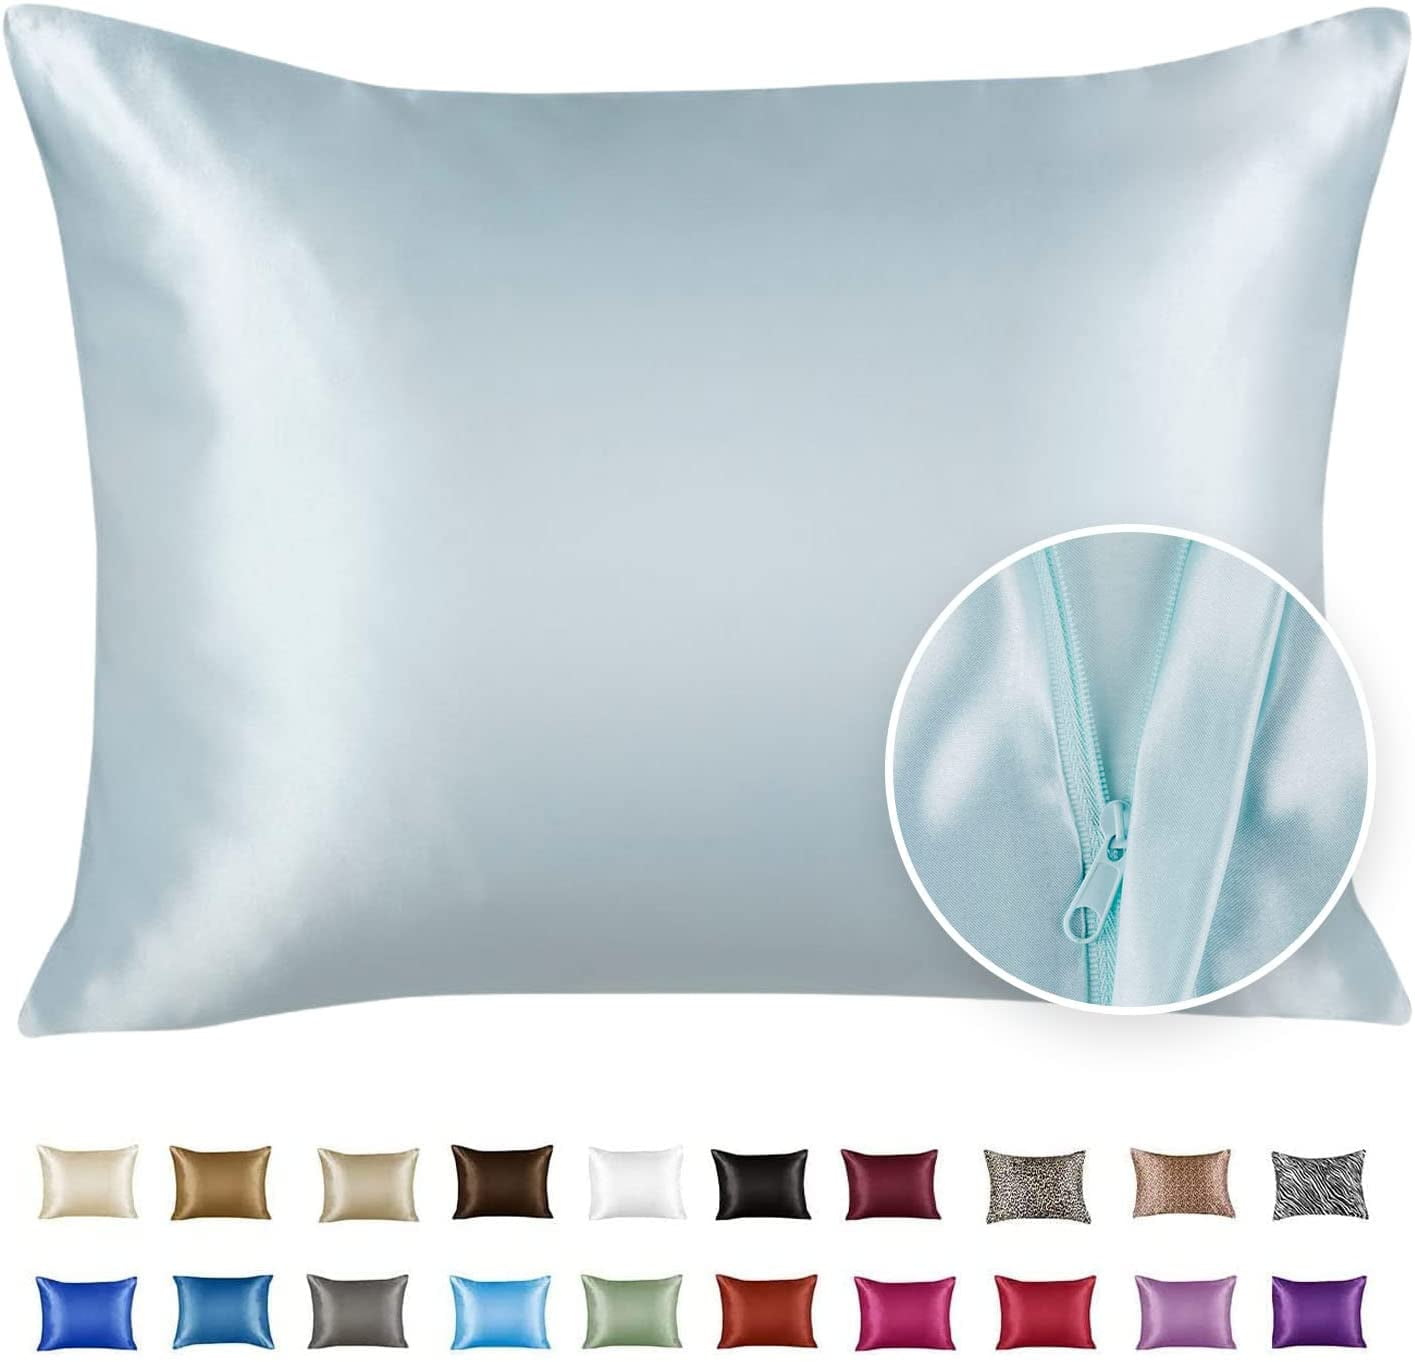 Luxury Satin Pillowcase for Hair and Skin King Satin Pillowcase with Zipper, Baby Blue (1 per Pack) - Blissford